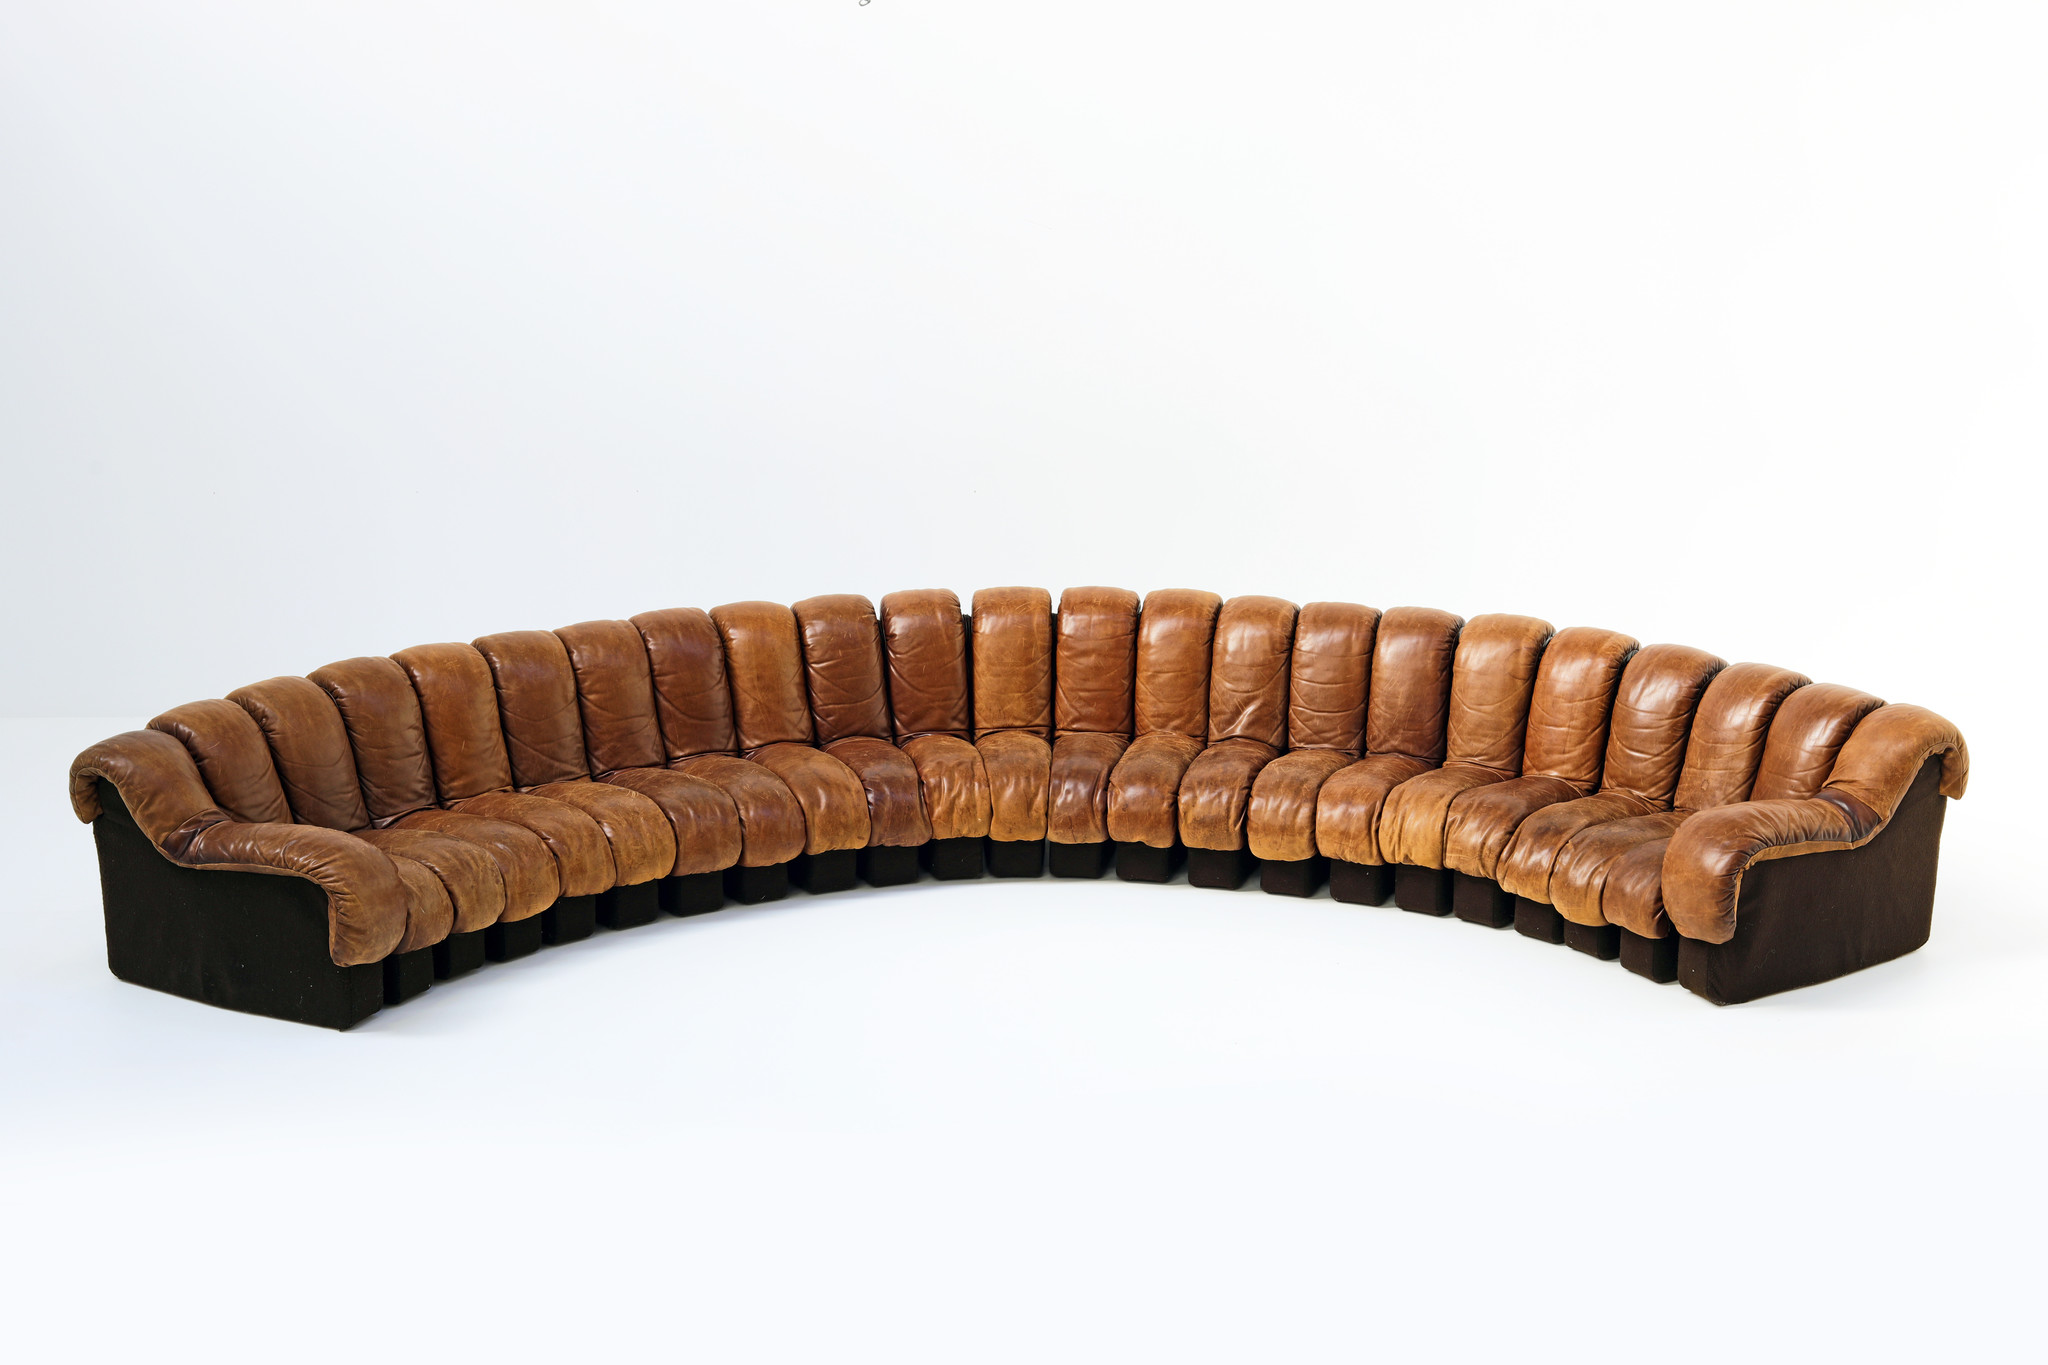 The iconic "Snake sofa" De Sede DS600